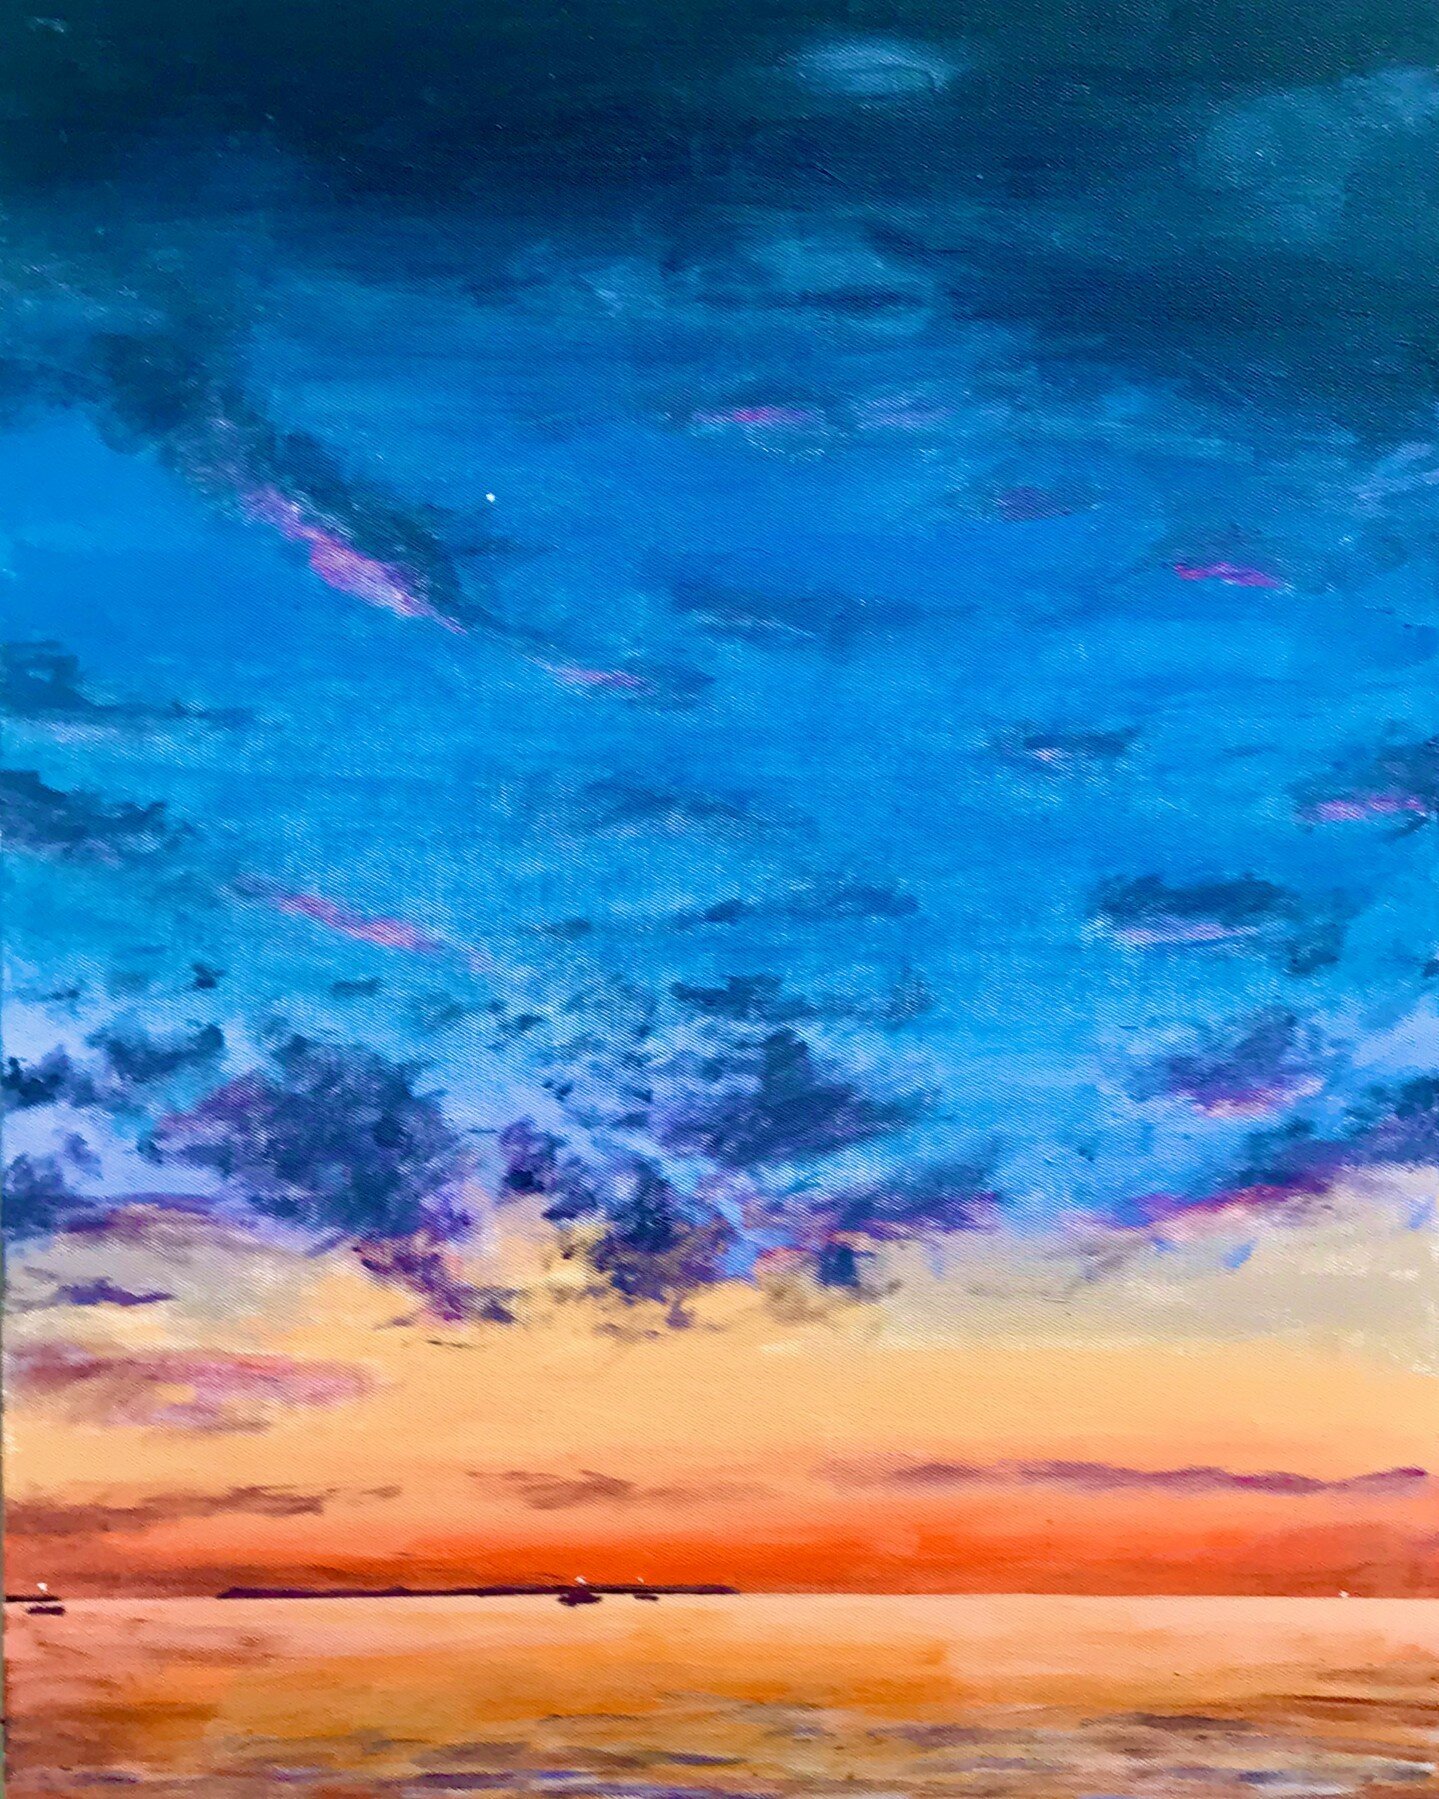 Afterglow XXIV oil on canvas 2023
Coming to the end of my time #bayside
To see all my Afterglow series of paintings, please visit https://www.artworkarchive.com/rooms/toddstonestudio/bfeef0
#Skywatching  #painting  #offshore 
#islamorada 
#toddstones